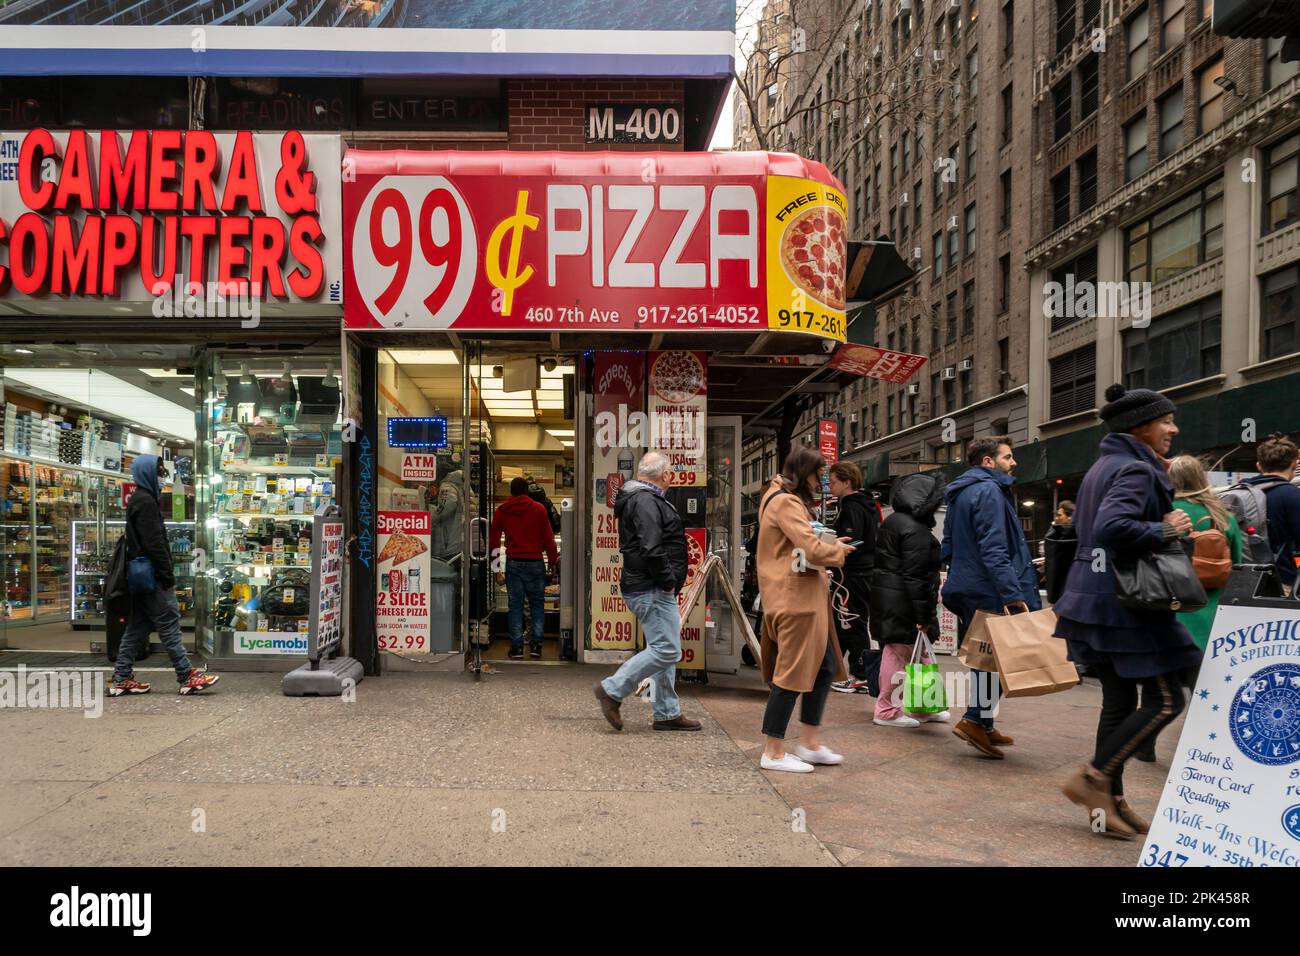 https://c8.alamy.com/comp/2PK458R/hungry-pizza-lovers-eat-at-a-99-cent-pizzeria-in-midtown-manhattan-in-new-york-on-friday-march-31-2023-richard-b-levine-2PK458R.jpg